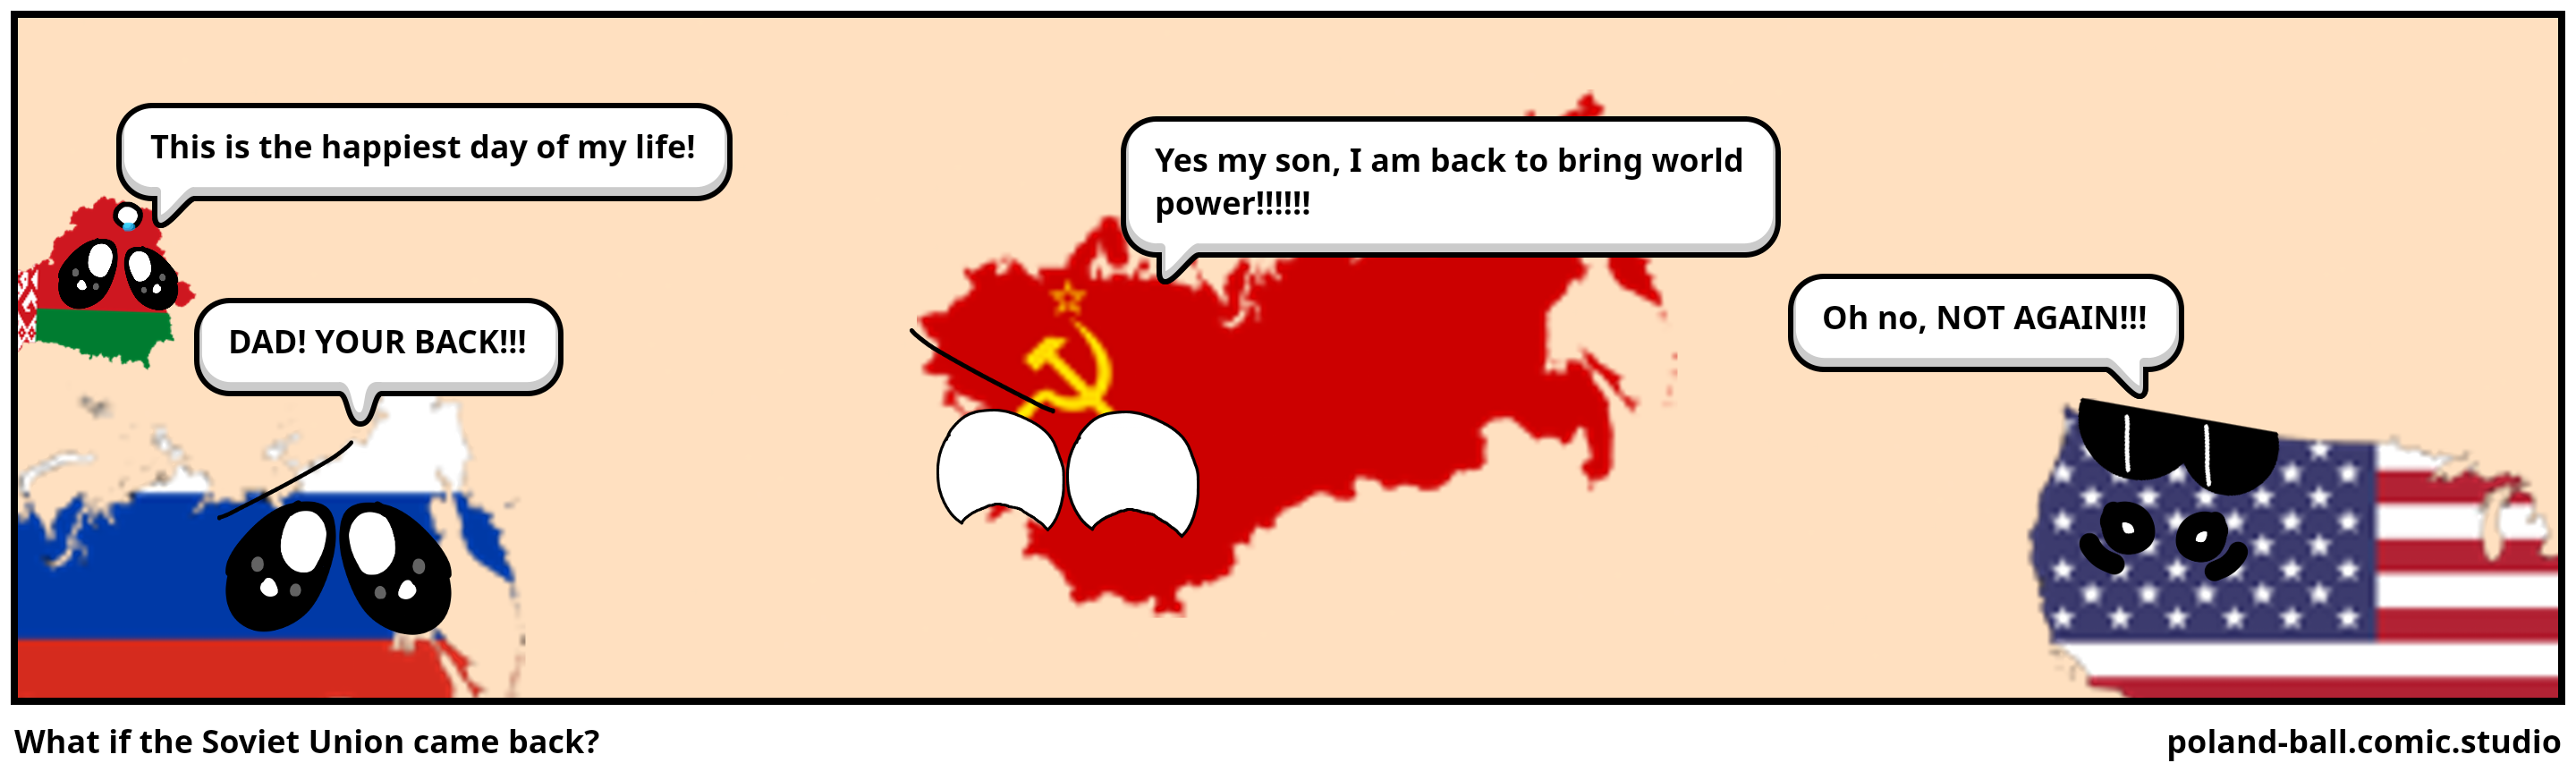 What if the Soviet Union came back?